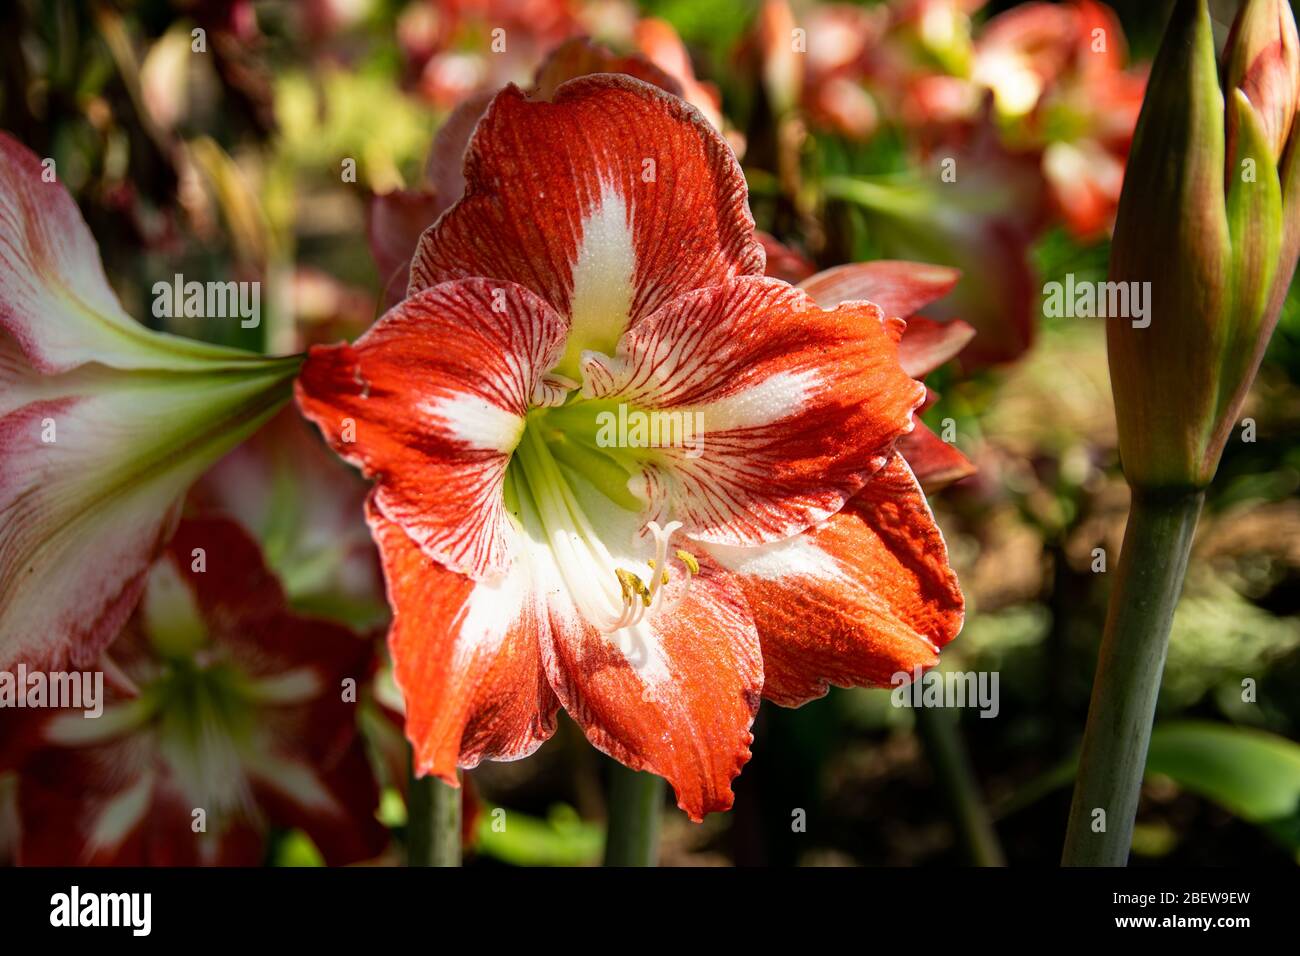 Beautiful red and white Barbados Lily in full bloom with its large, delicate petals open wide as it soaks up the sunlight in a botanical garden on a s Stock Photo